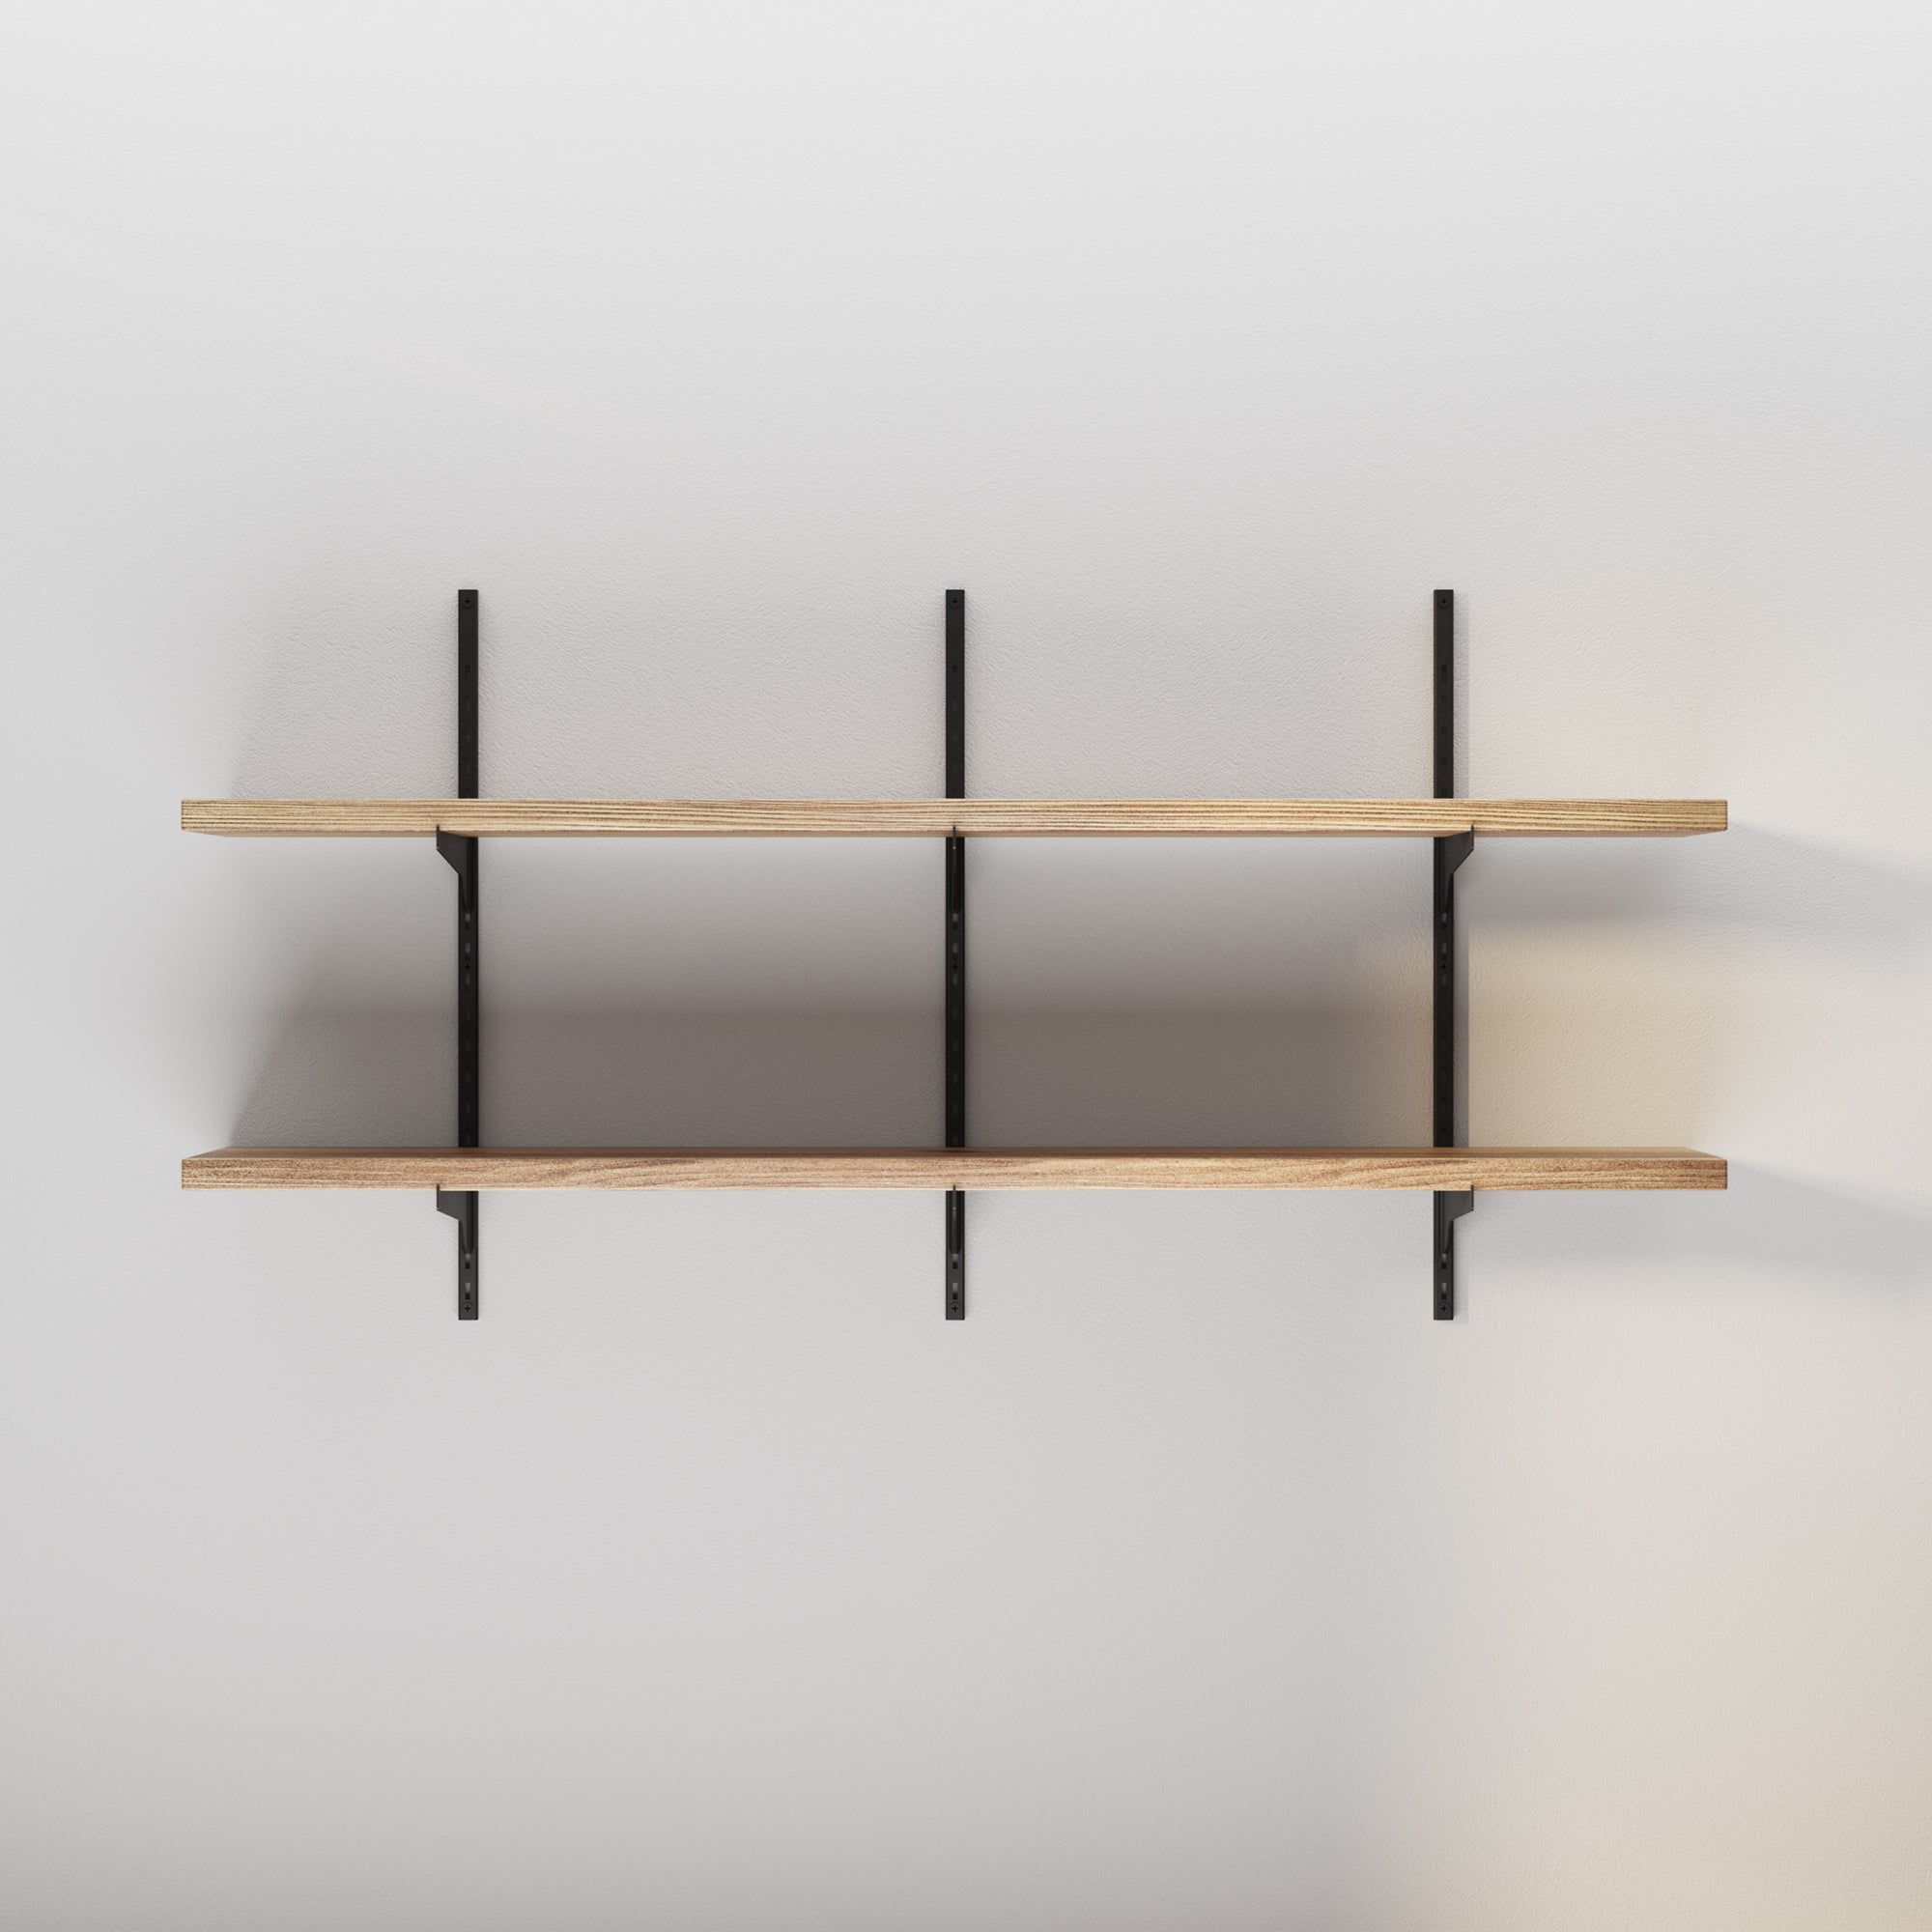 A shelving unit for shelf decor aesthetic mounted on a wall with black metal brackets, empty and ready to hold items.